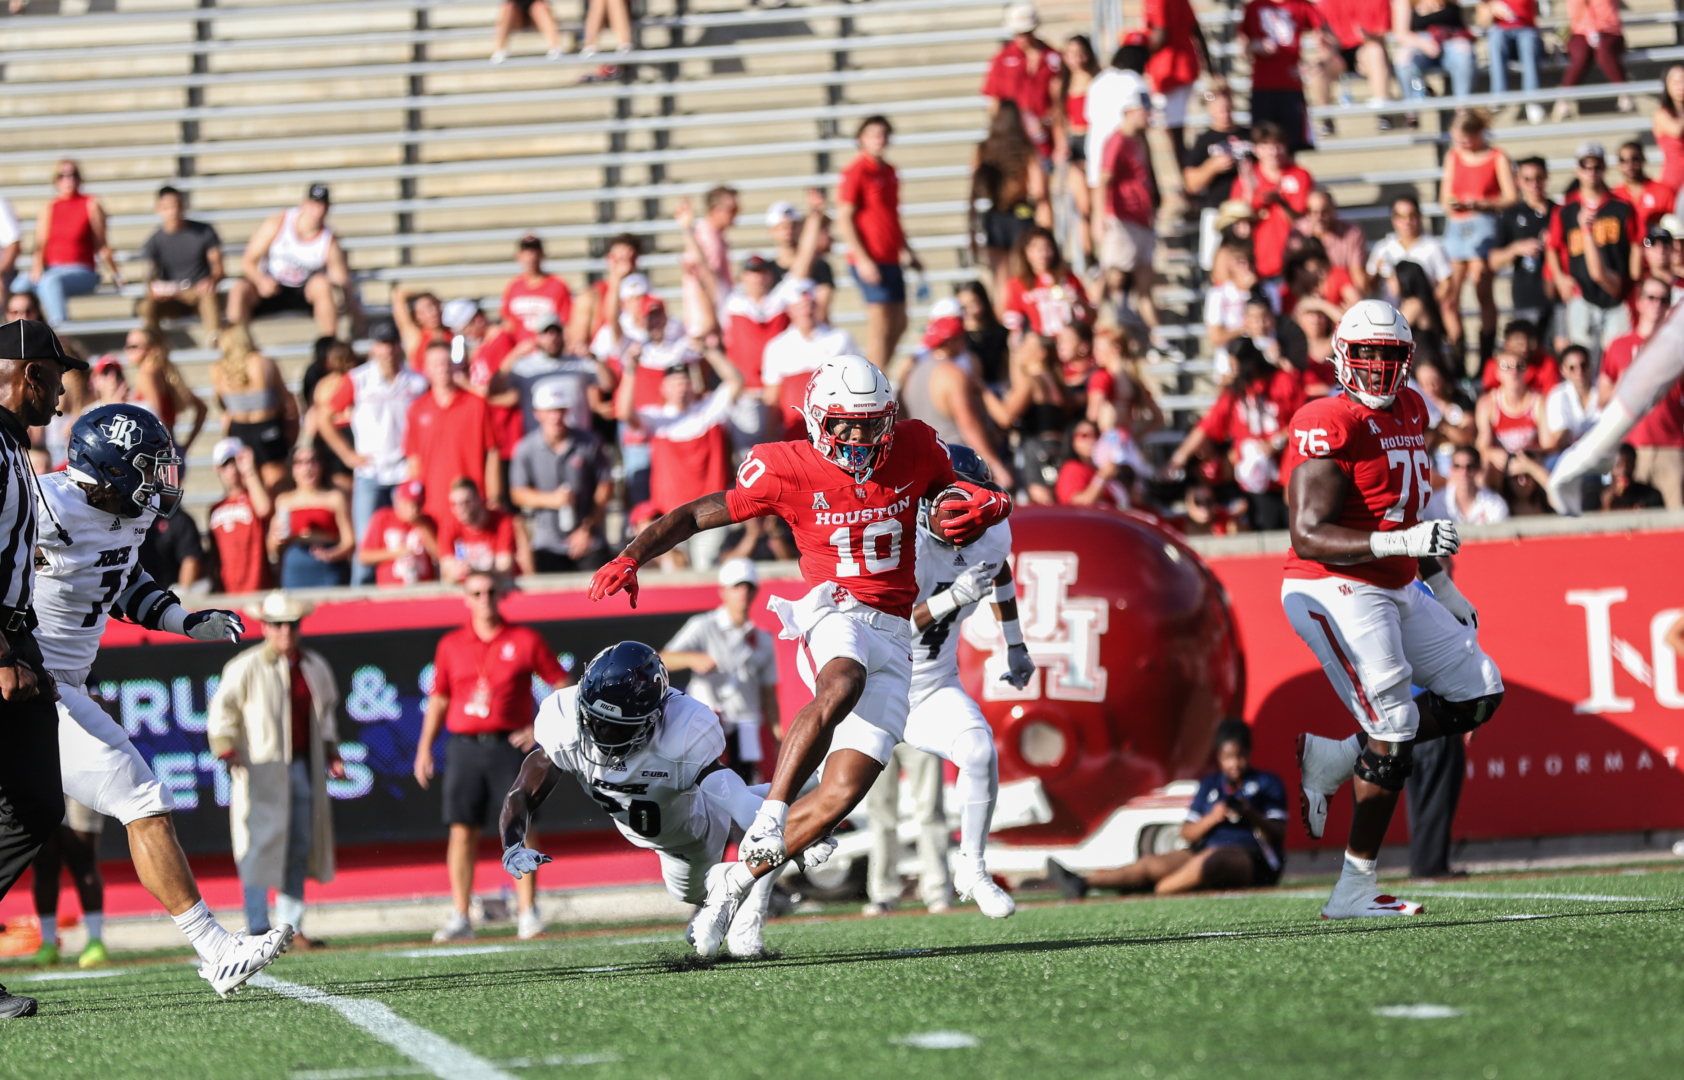 Freshman receiver Matthew Golden takes a screen pass from senior quarterback Clayton Tune 19 yards into the end zone in the first quarter of UH's win over Rice on Saturday night at TDECU Stadium. | Sean Thomas/The Cougar